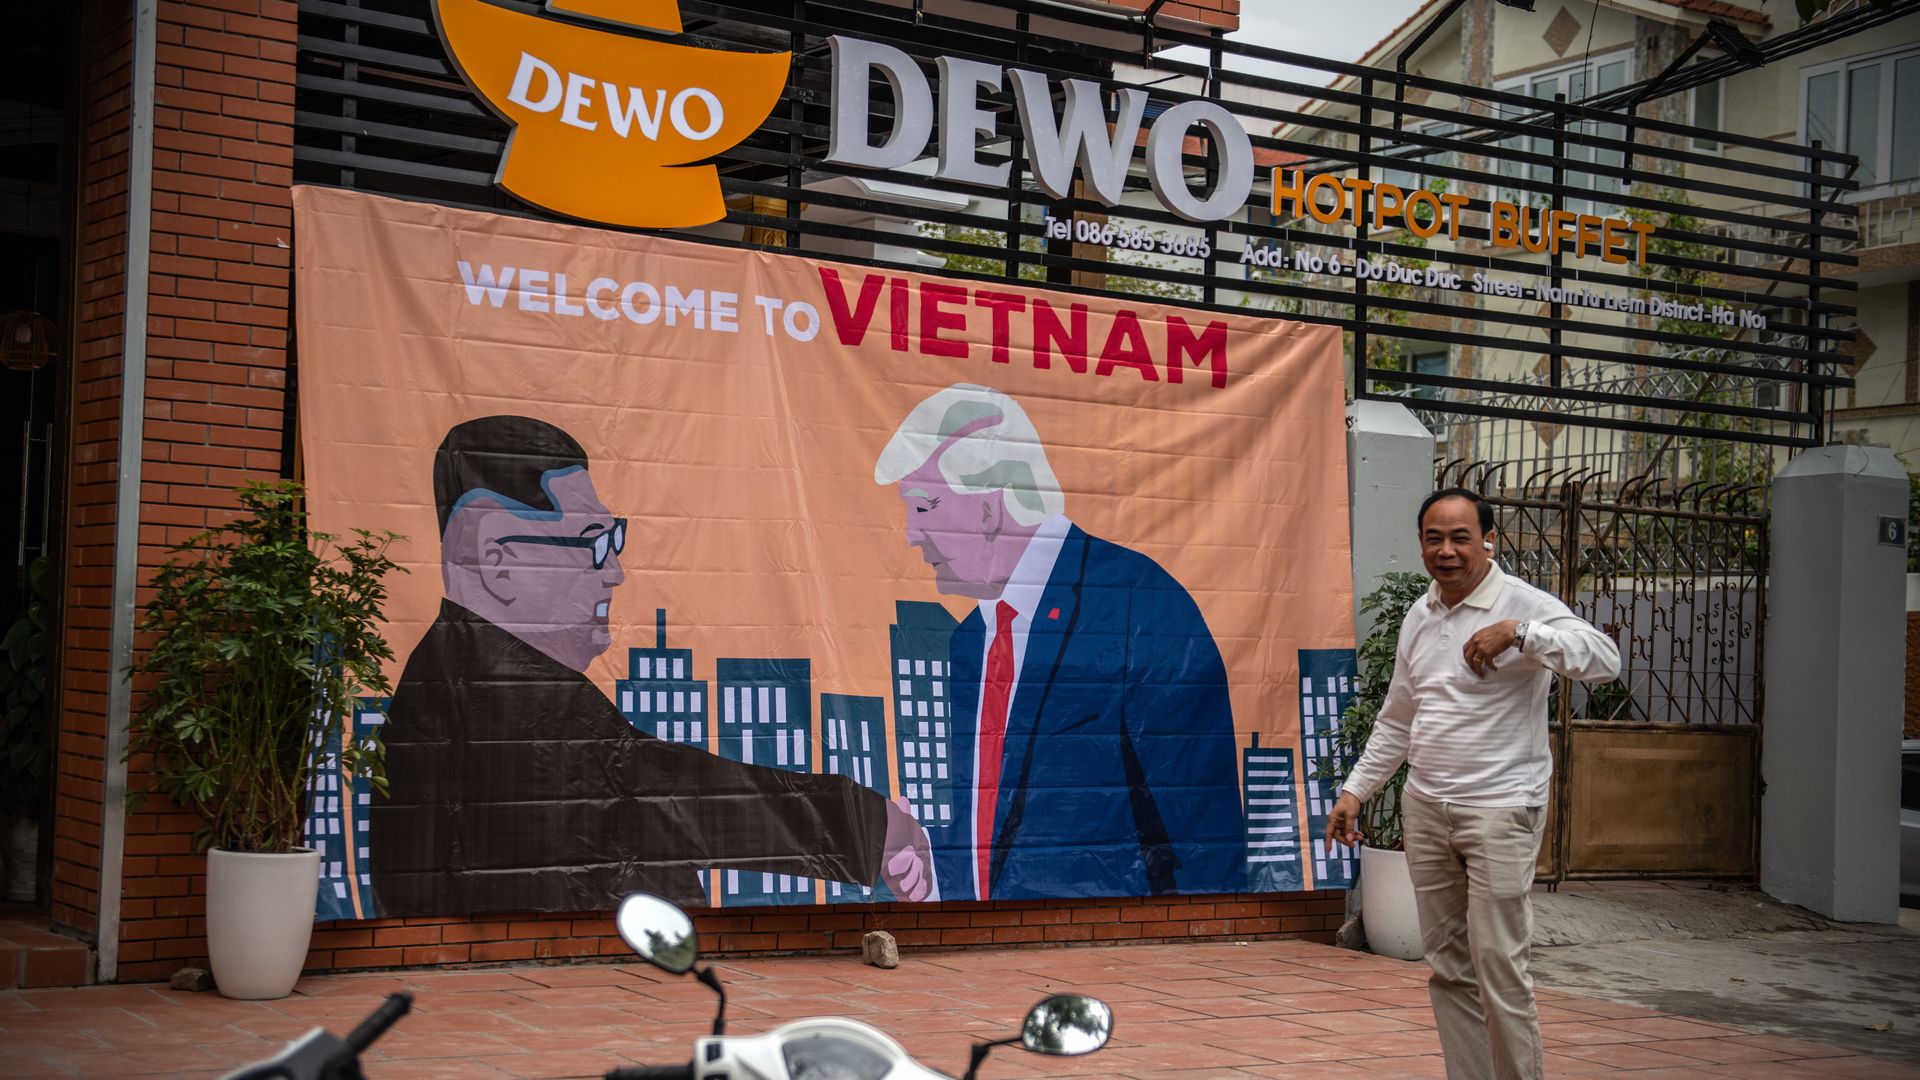 A banner showing President Donald Trump and North Korean leader Kim Jong-un shaking hands next to the words 'Welcome to Vietnam' 